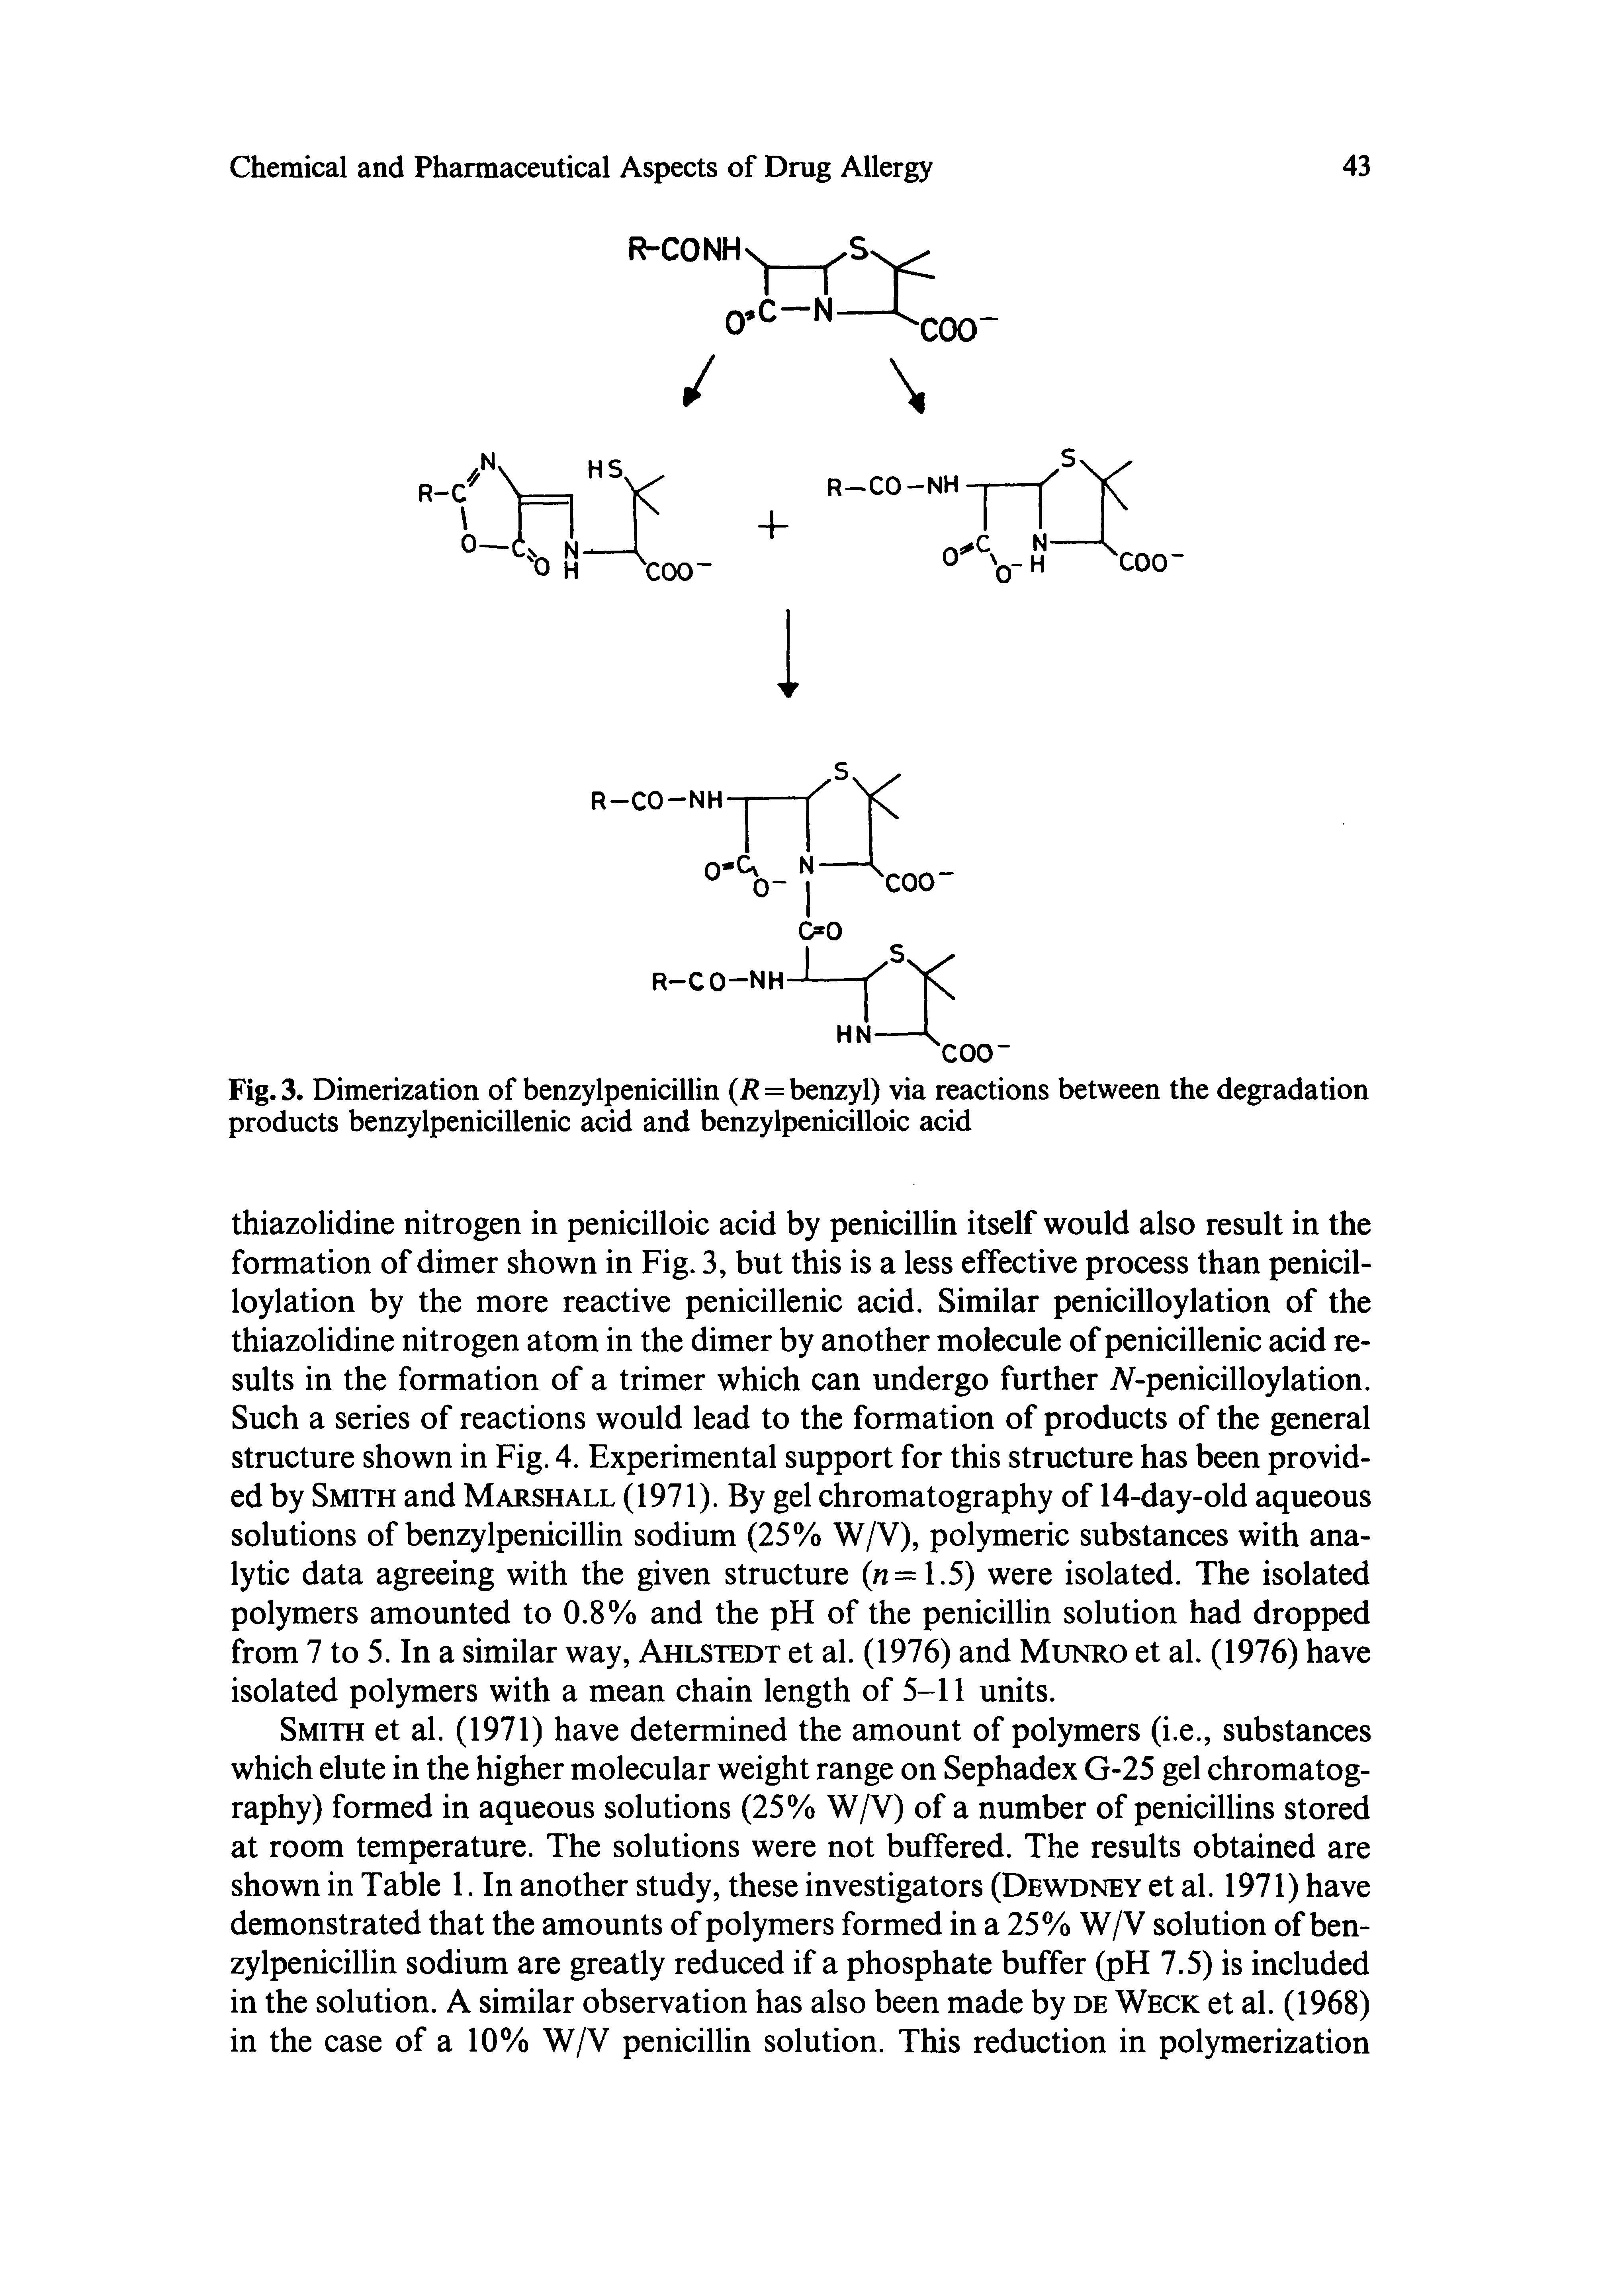 Fig.3. Dimerization of benzylpenicillin (/ = benzyl) via reactions between the degradation products benzylpenicillenic acid and benzylpenicilloic acid...